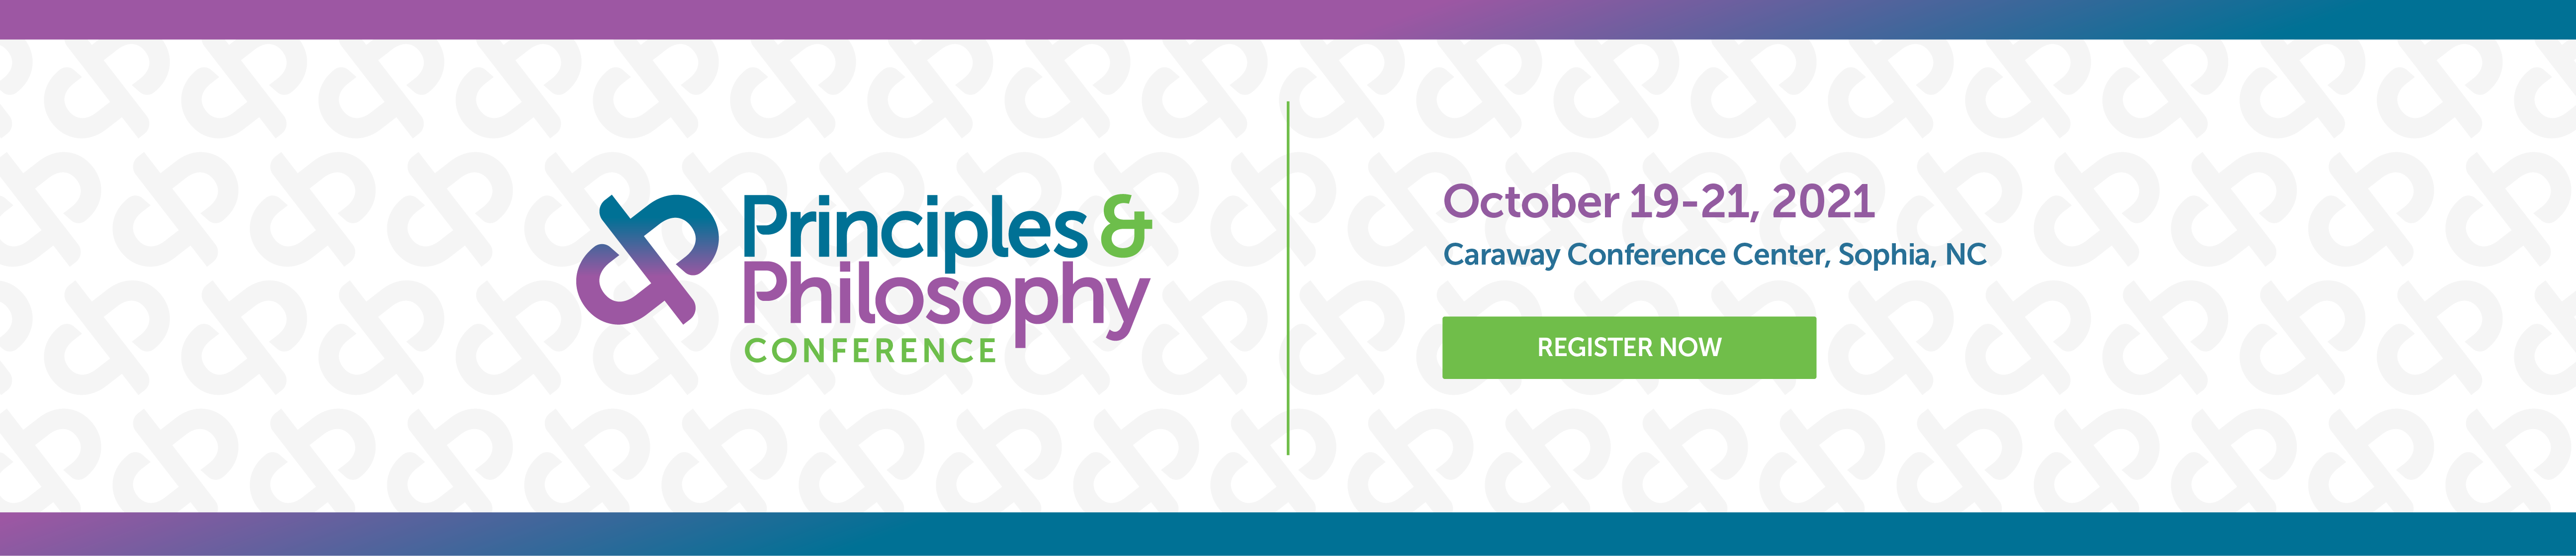 Principles & Philosophy Conference - October 19-21, 2021 Carraway Conference Center, Sophia, NC - Register Now